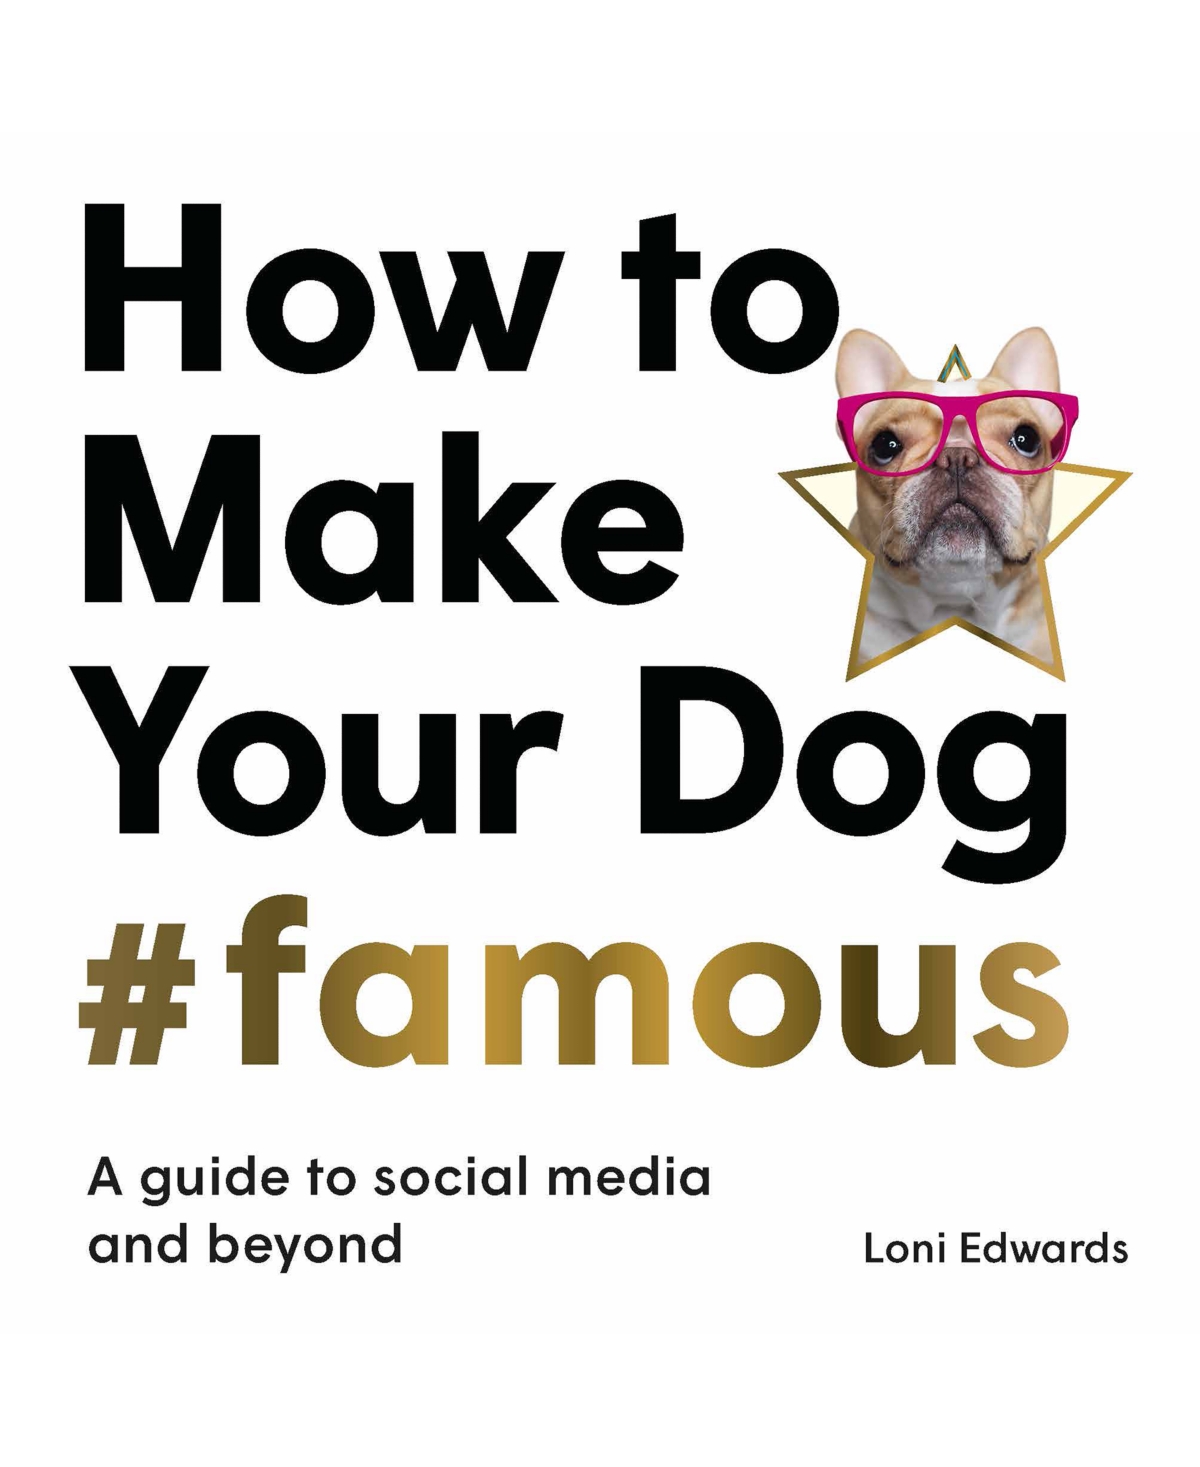 ISBN 9781913947149 product image for Chronicle Books How to Make Your Dog Famous | upcitemdb.com